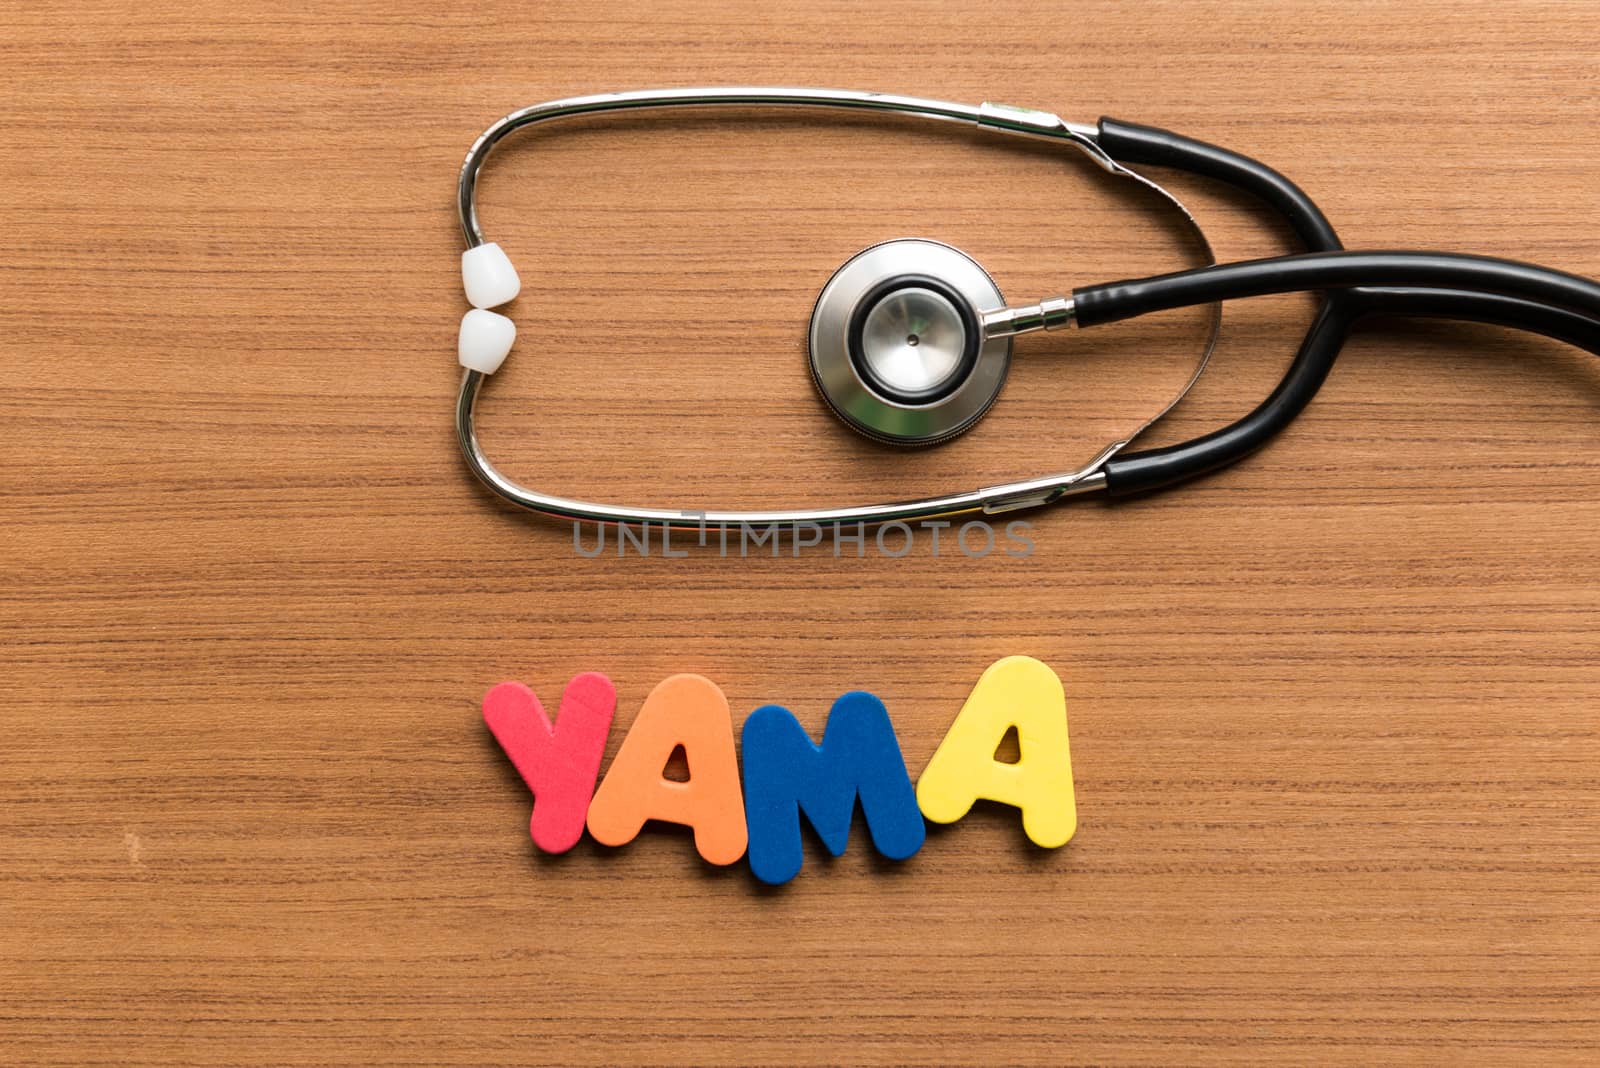 yama colorful word with stethoscope on wooden background